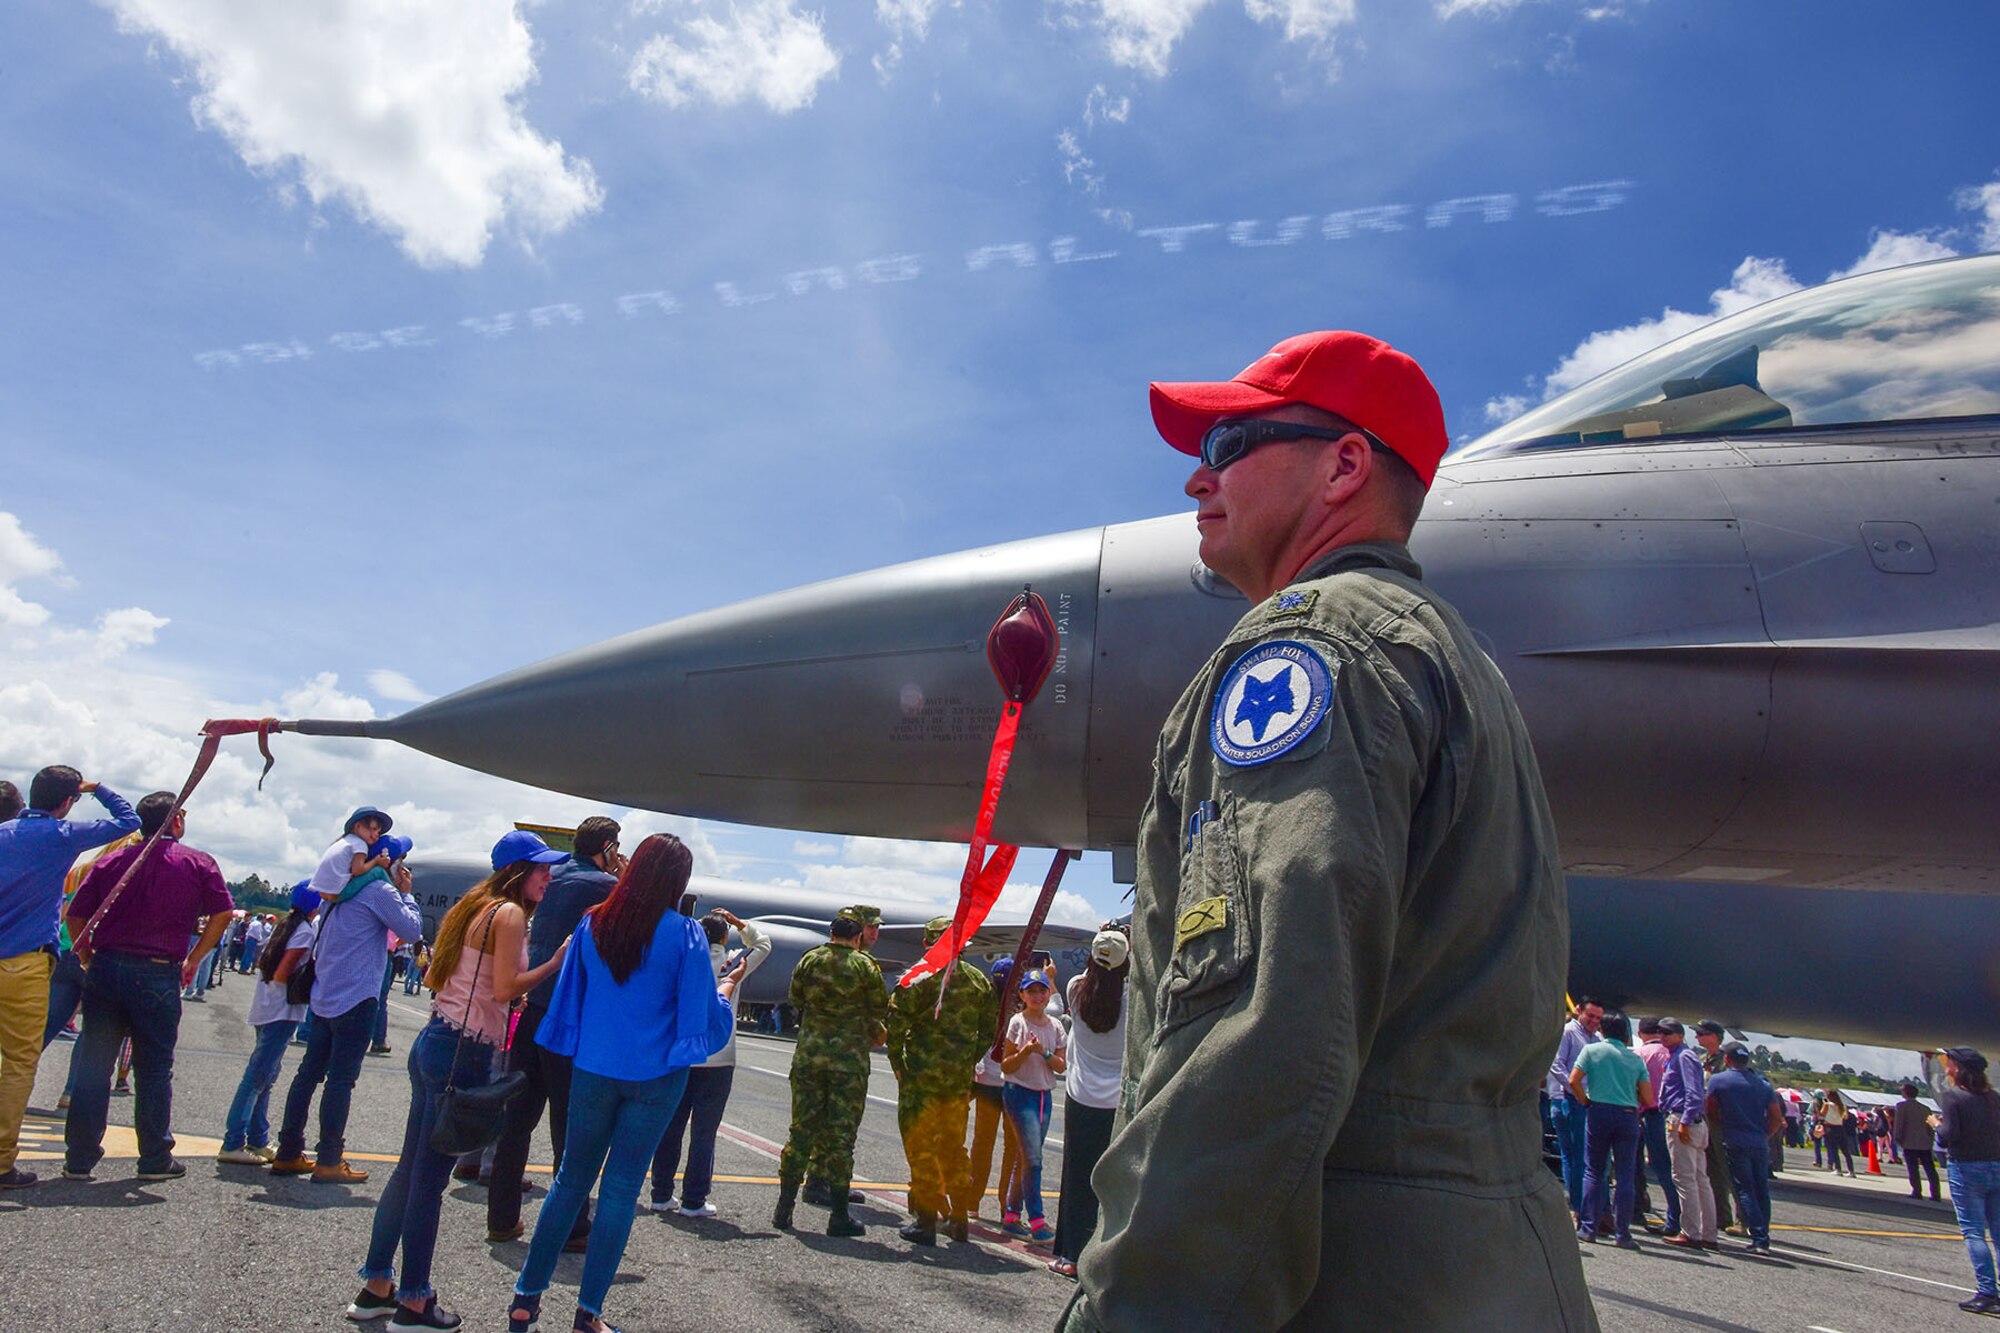 U.S. Air Force Lt. Col. Andrew Thorne, a fighter pilot assigned to the 157th Fighter Squadron, stands next to a U.S. Air Force F-16 Fighting Falcon assigned to the South Carolina Air National Guard’s 169th Fighter Wing while at José María Córdova International Airport duringthe Colombian Air Force’s Feria Aeronautica Internaccional – Colombia in Rionegro, Colombia, July 14, 2017. The United States Air Force is participating in the four-day air show with two South Carolina Air National Guard F-16s as static displays, plus static displays of a KC-135, KC-10, along with an F-16 aerial demonstration by the Air Combat Command’s Viper East Demo Team. United States military participation in the air show provides an opportunity to strengthen our military-to-military relationships with regional partners and provides the opportunity to meet with our Colombian air force counterparts and facilitate interoperability, which can be exercised in future cooperation events such as exercises and training. (U.S. Air National Guard photo by Senior Airman Megan Floyd)